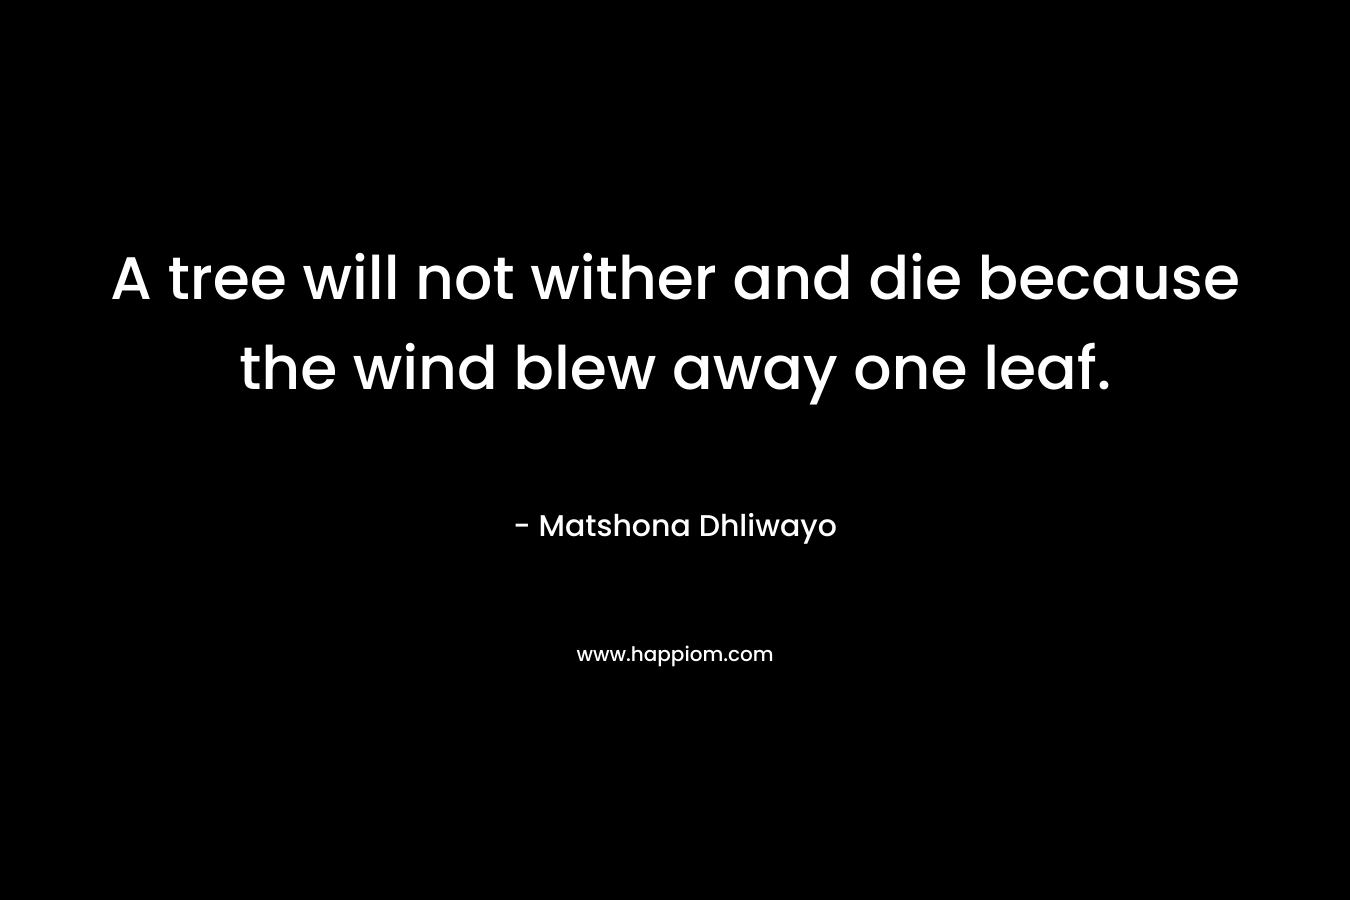 A tree will not wither and die because the wind blew away one leaf.